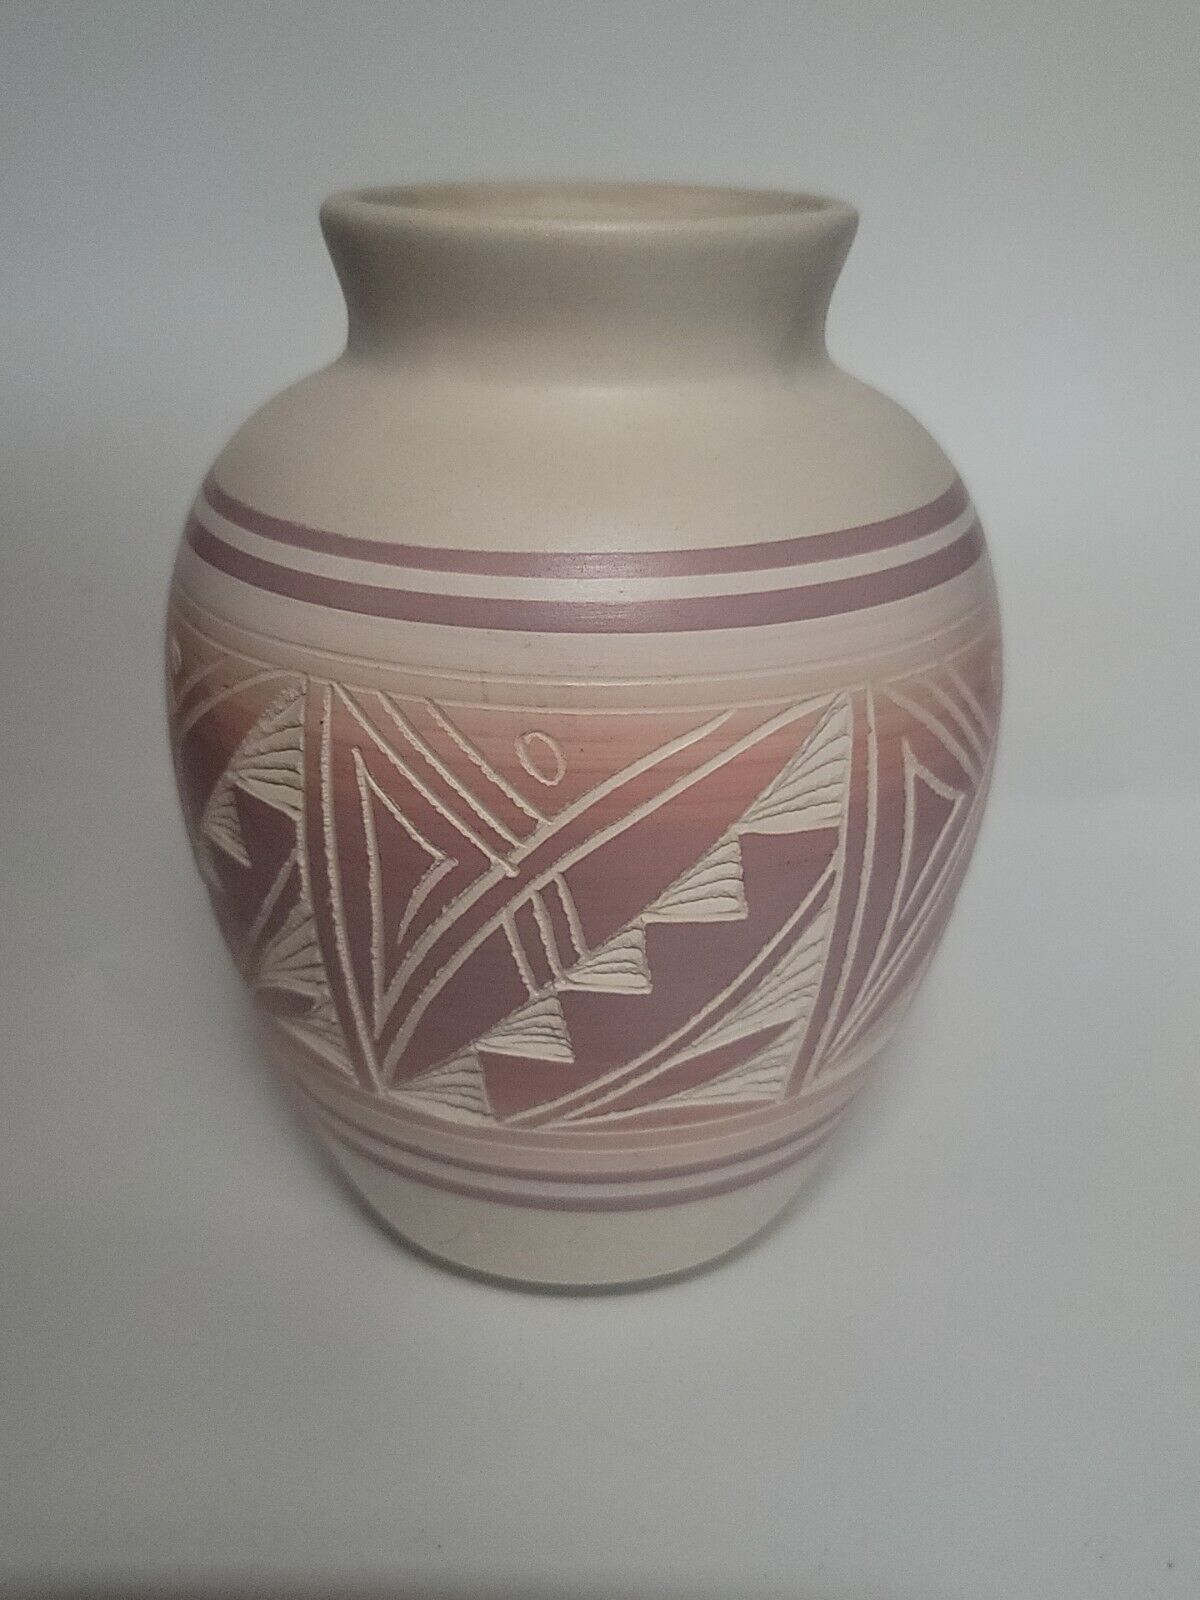 Vintage Hozoni Pottery Navajo Vase Handpainted Hand Etched Signed by Artist 10”